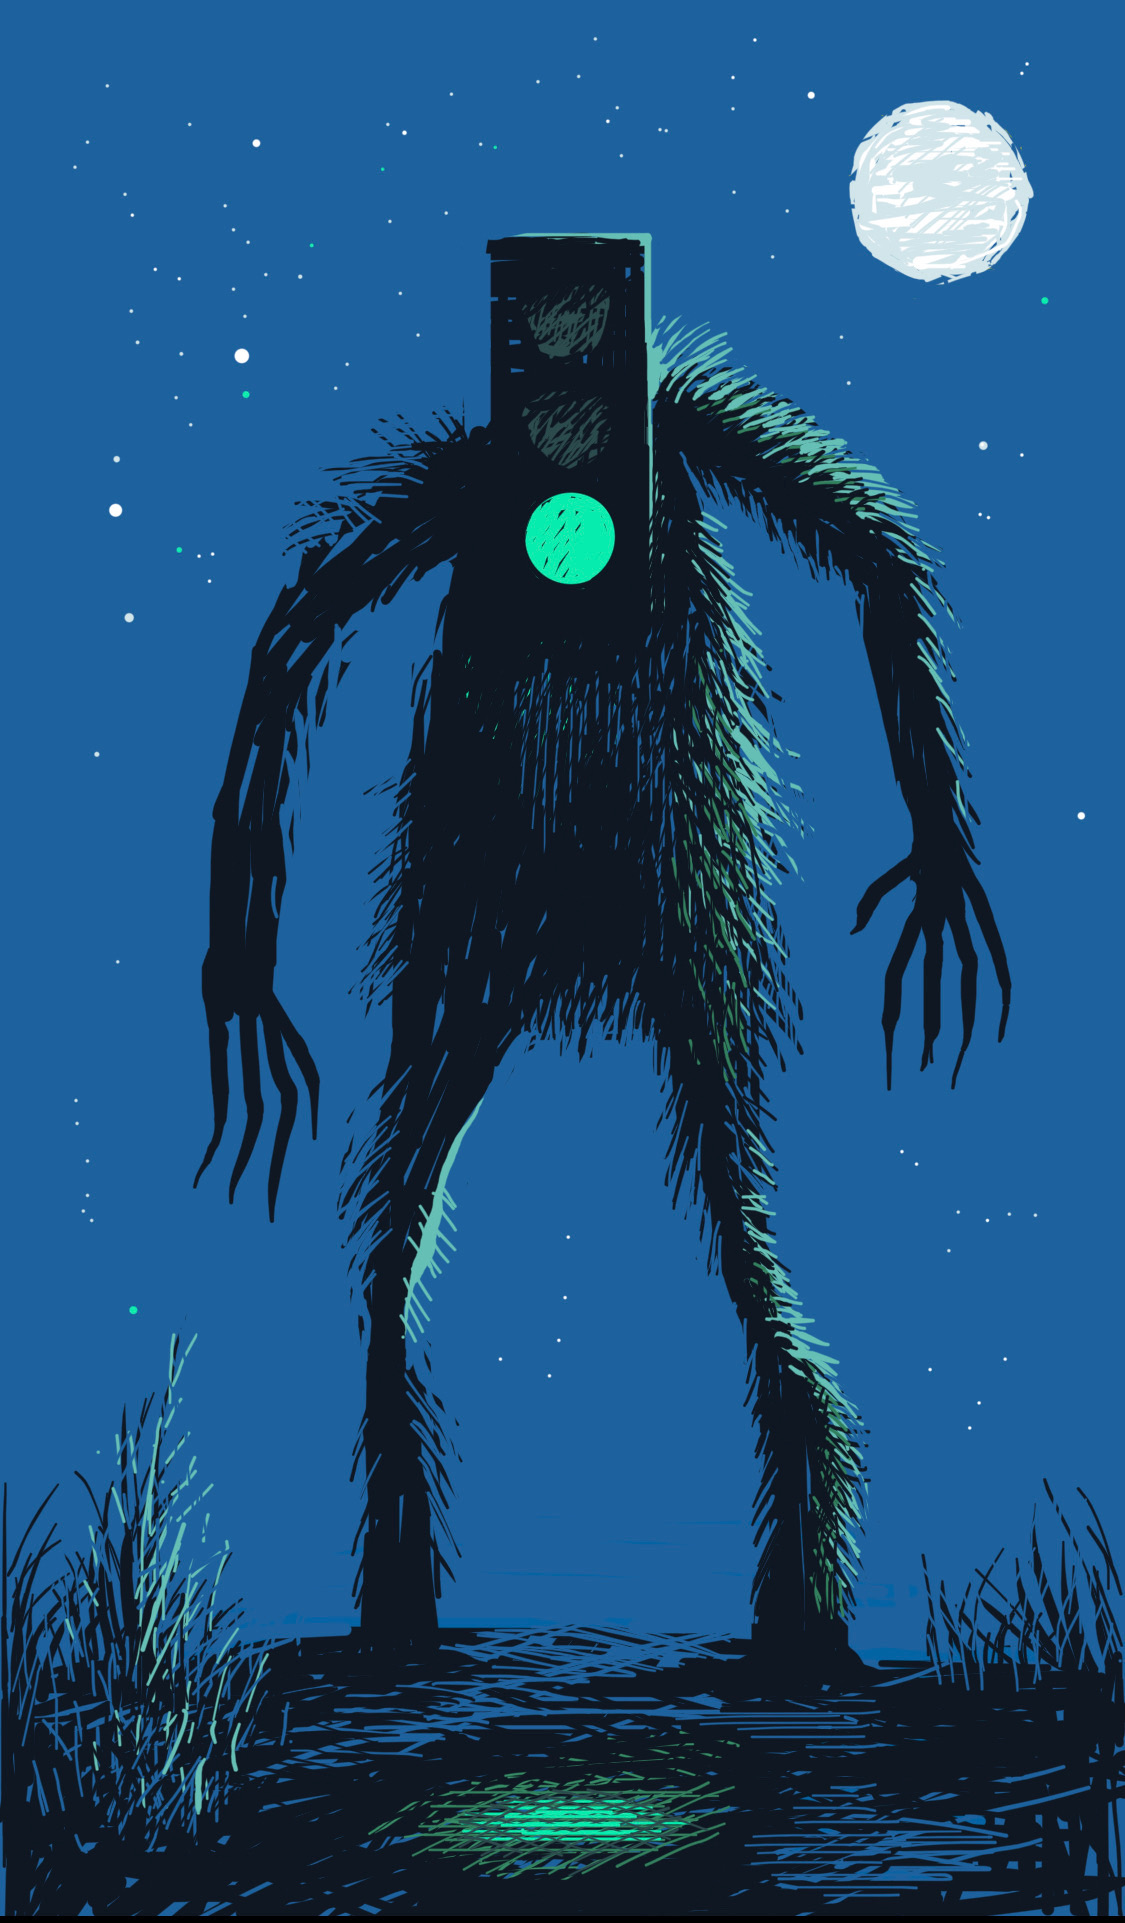 A furry monster stalks in the moonlight. The monster has long claws and a head that is a traffic light set to green.